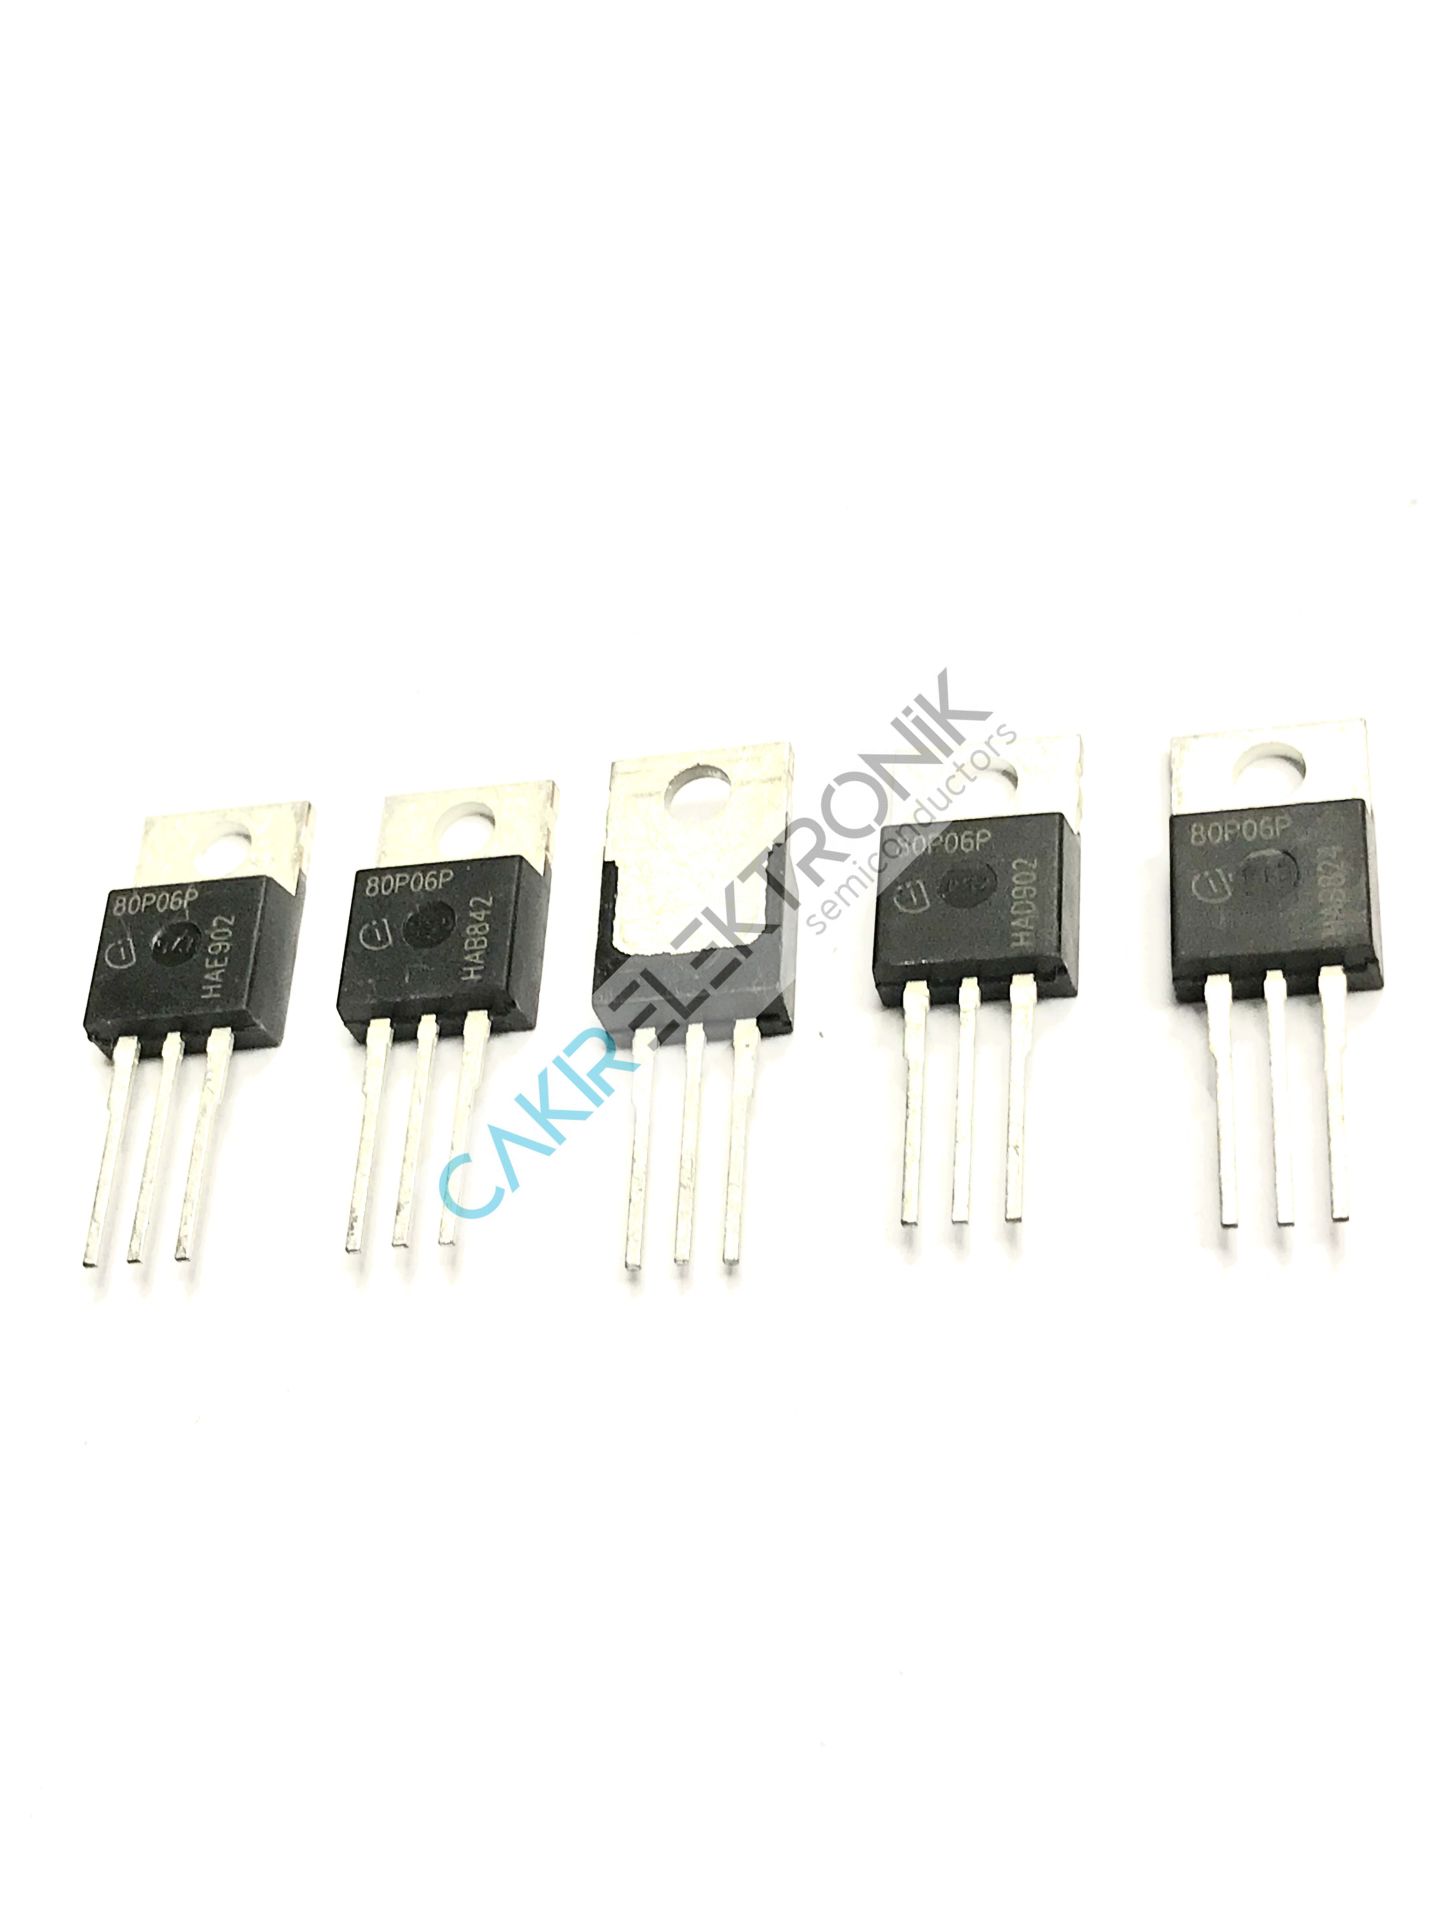 SPP80P06P - 80P06P - 80P06 - MOSFET P-Ch -60V -80A TO220-3